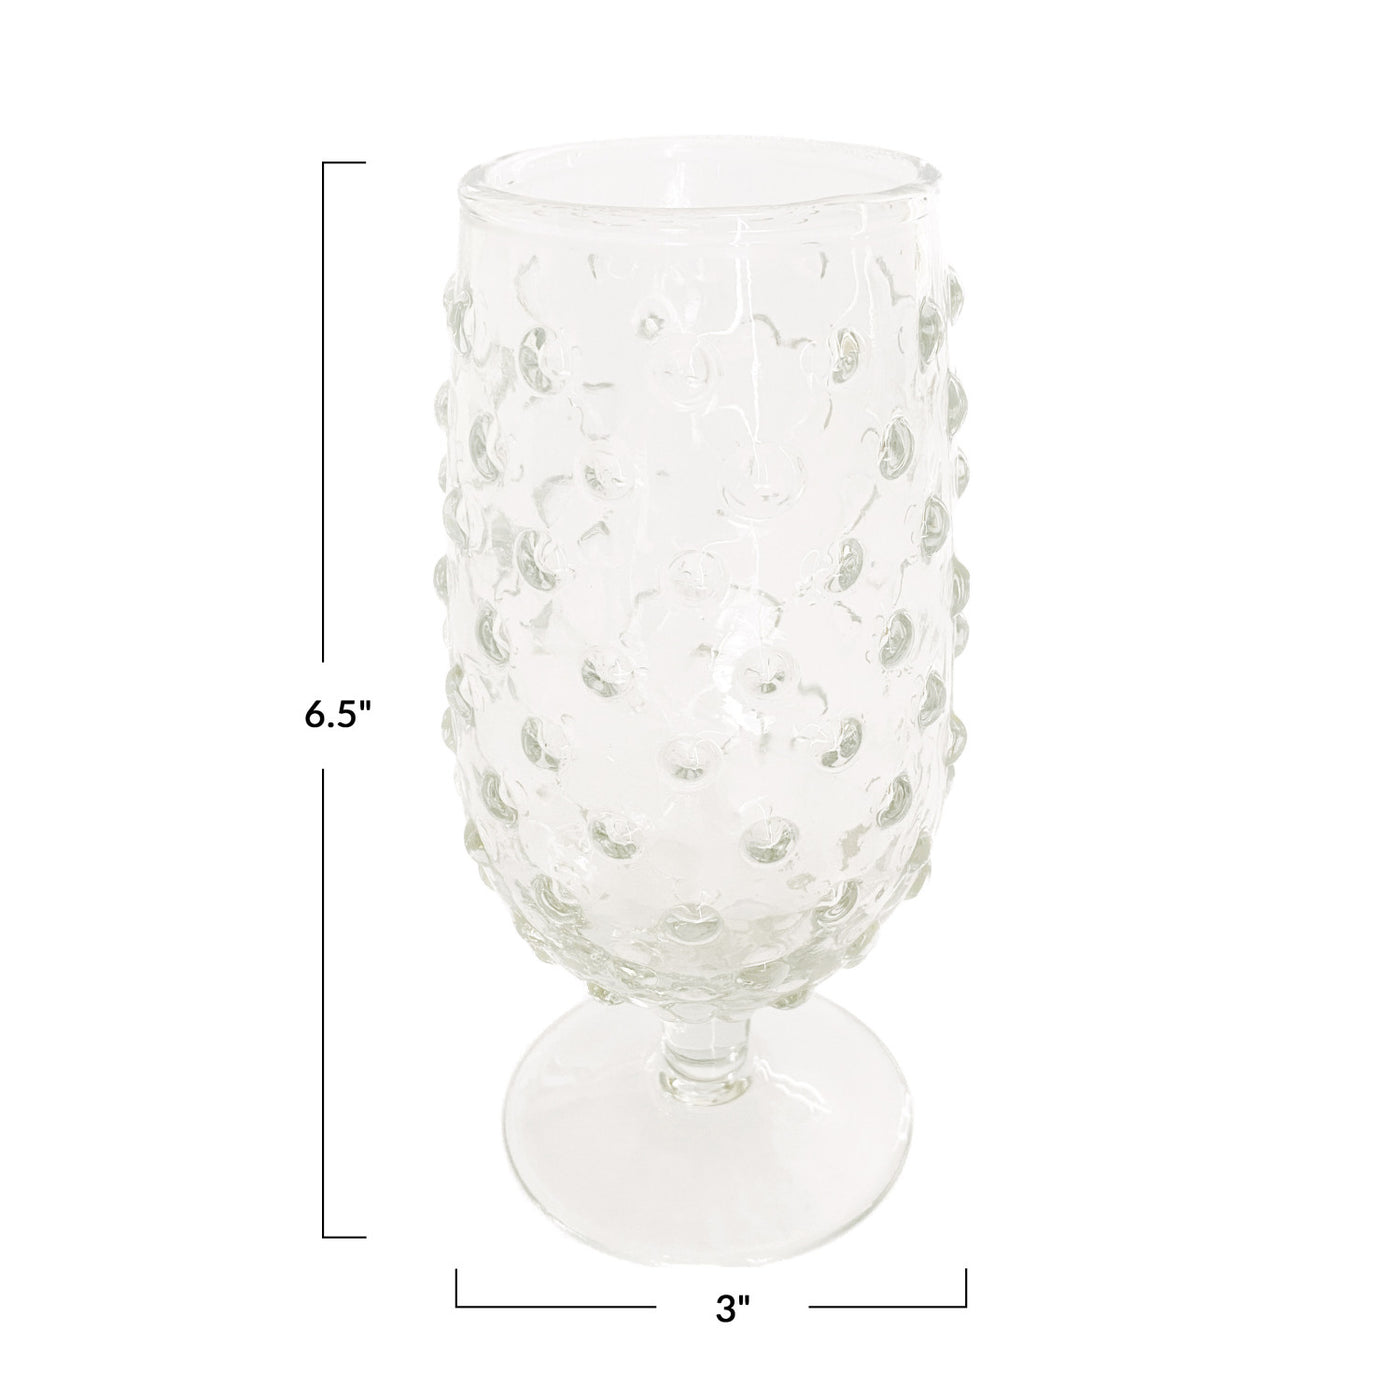 Recycled Glass Hobnail Stemmed Drinking Glass, 12oz.